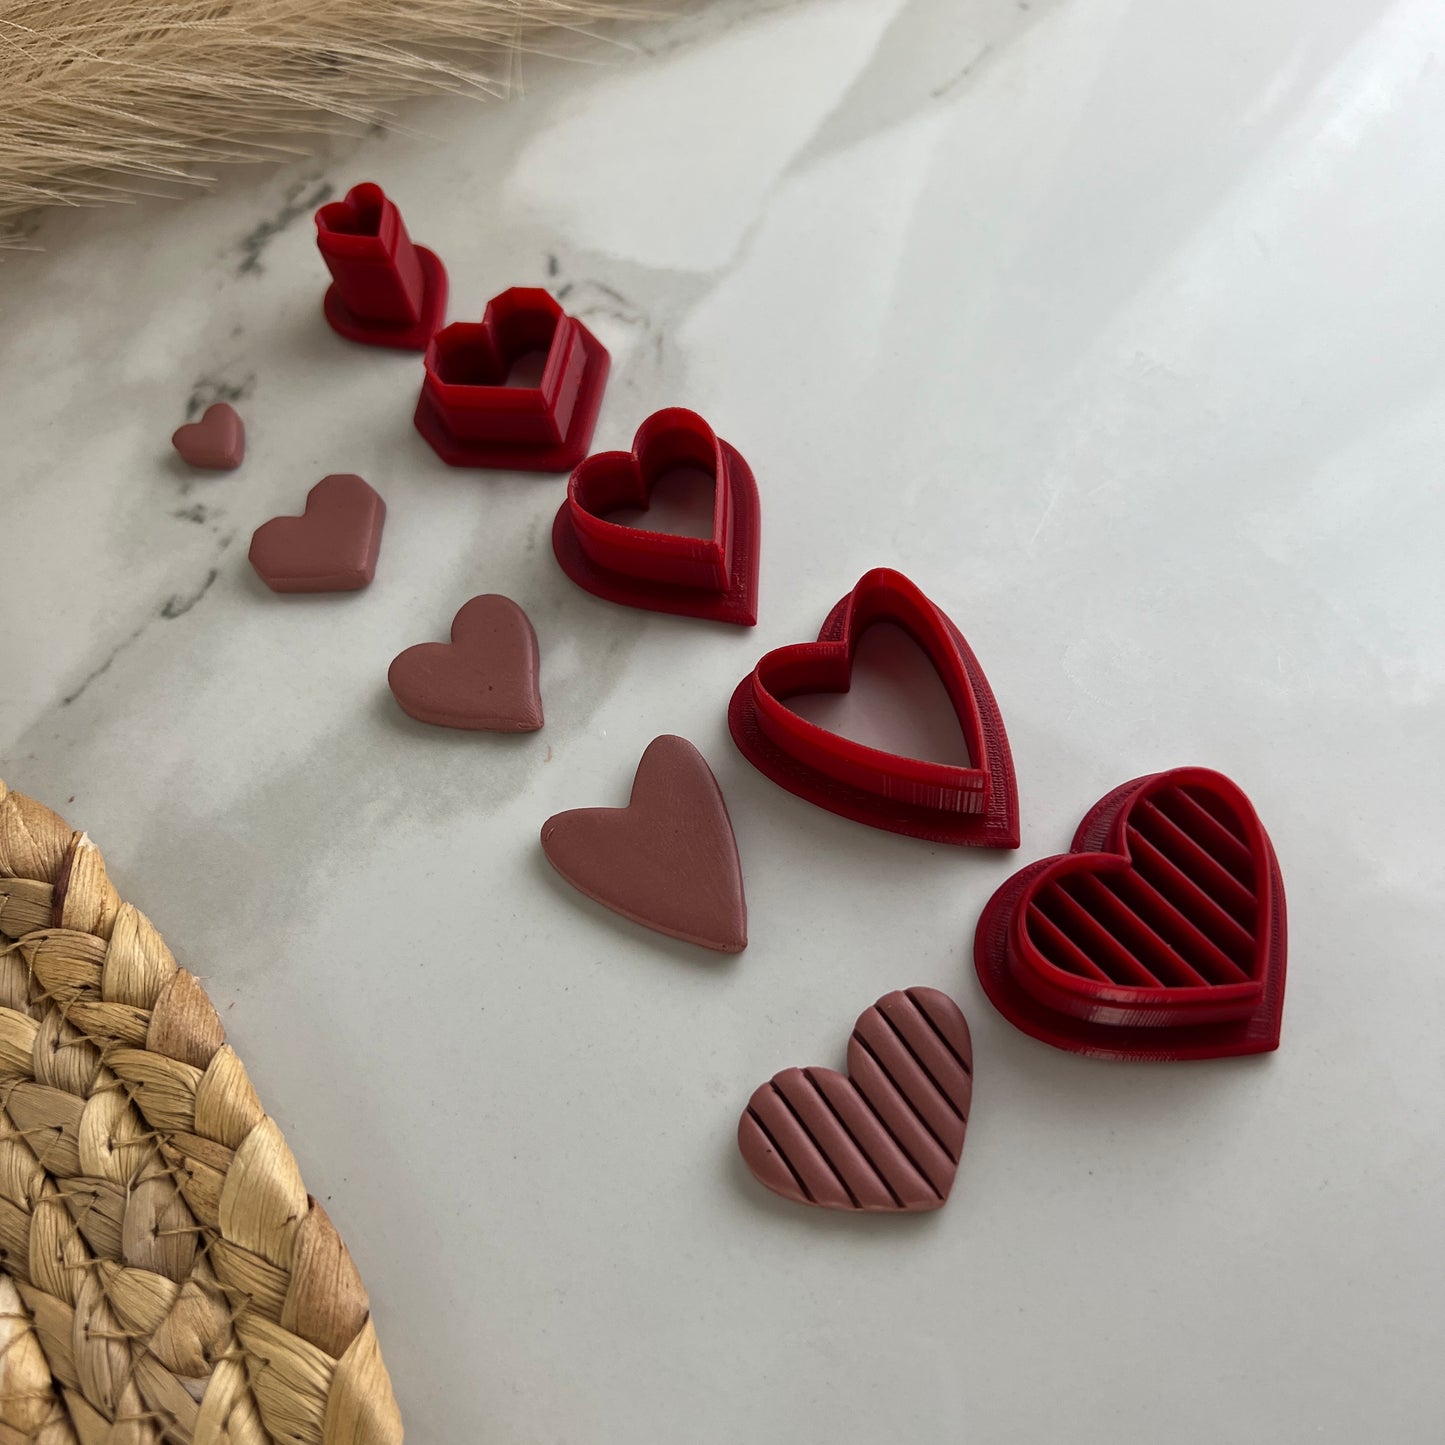 5-Piece Assorted Hearts Bundle Valentine's Day Polymer Clay Cutter